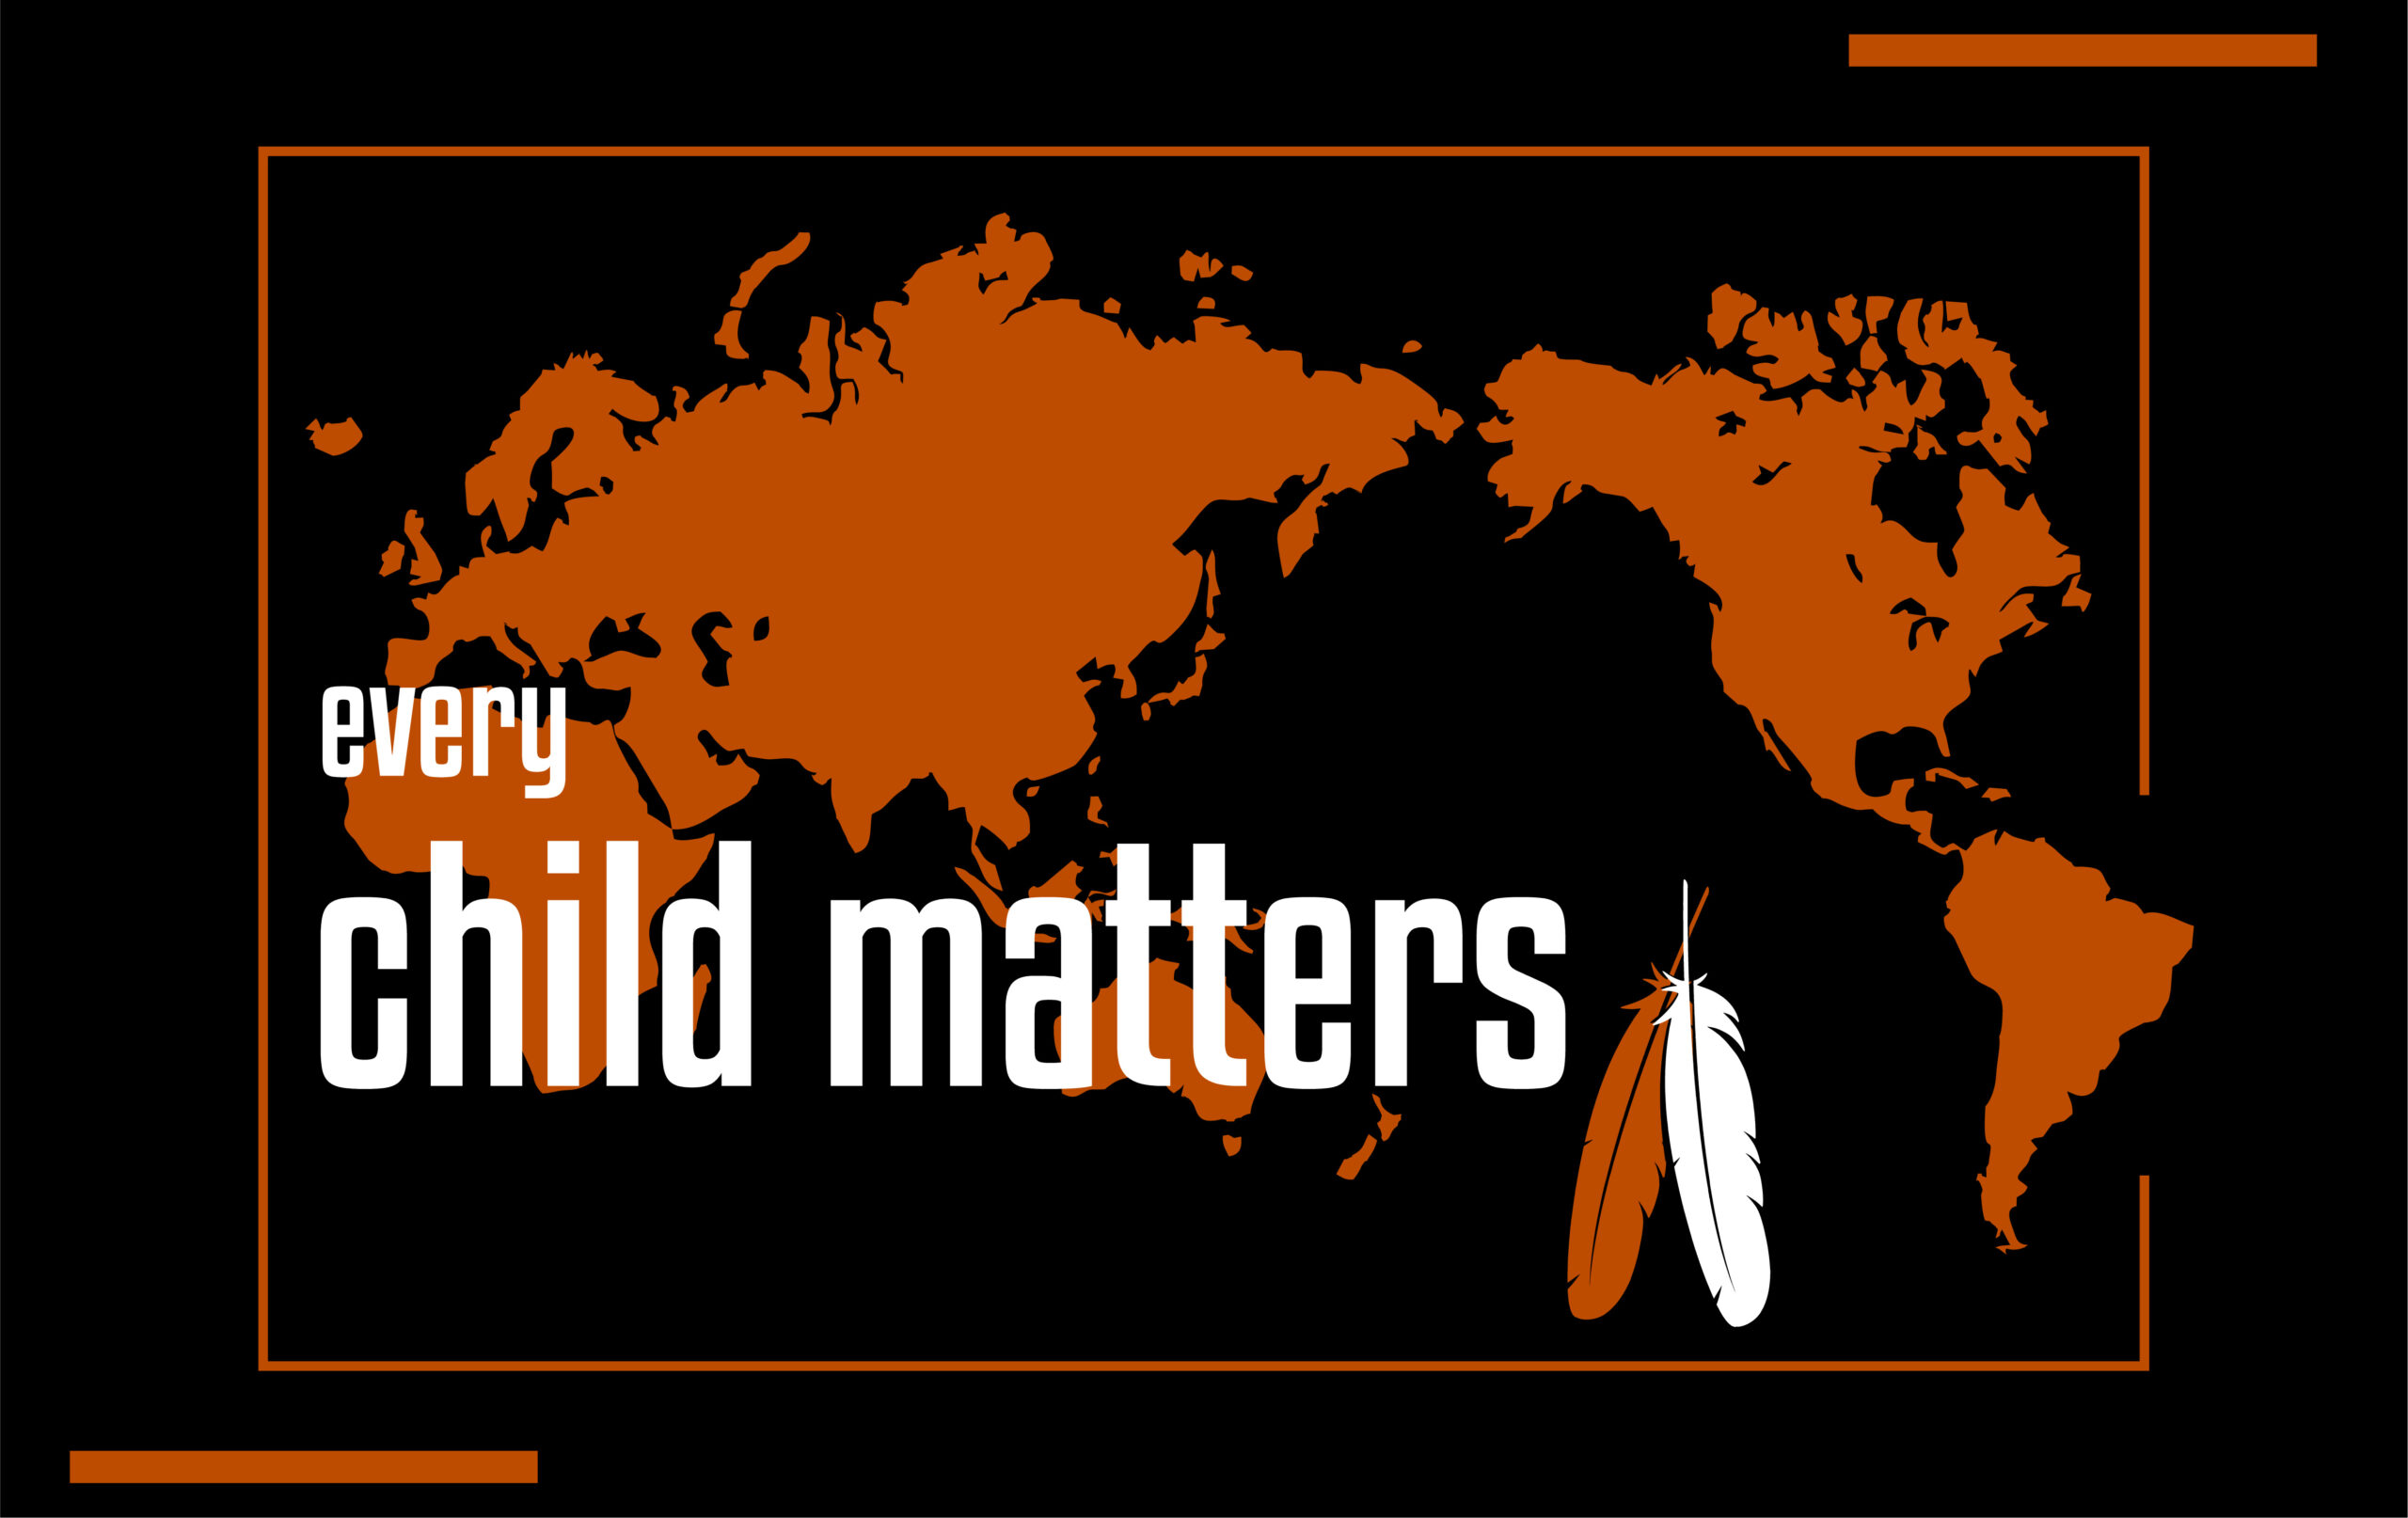 "Every child matters" written on top of a world map background with feathers